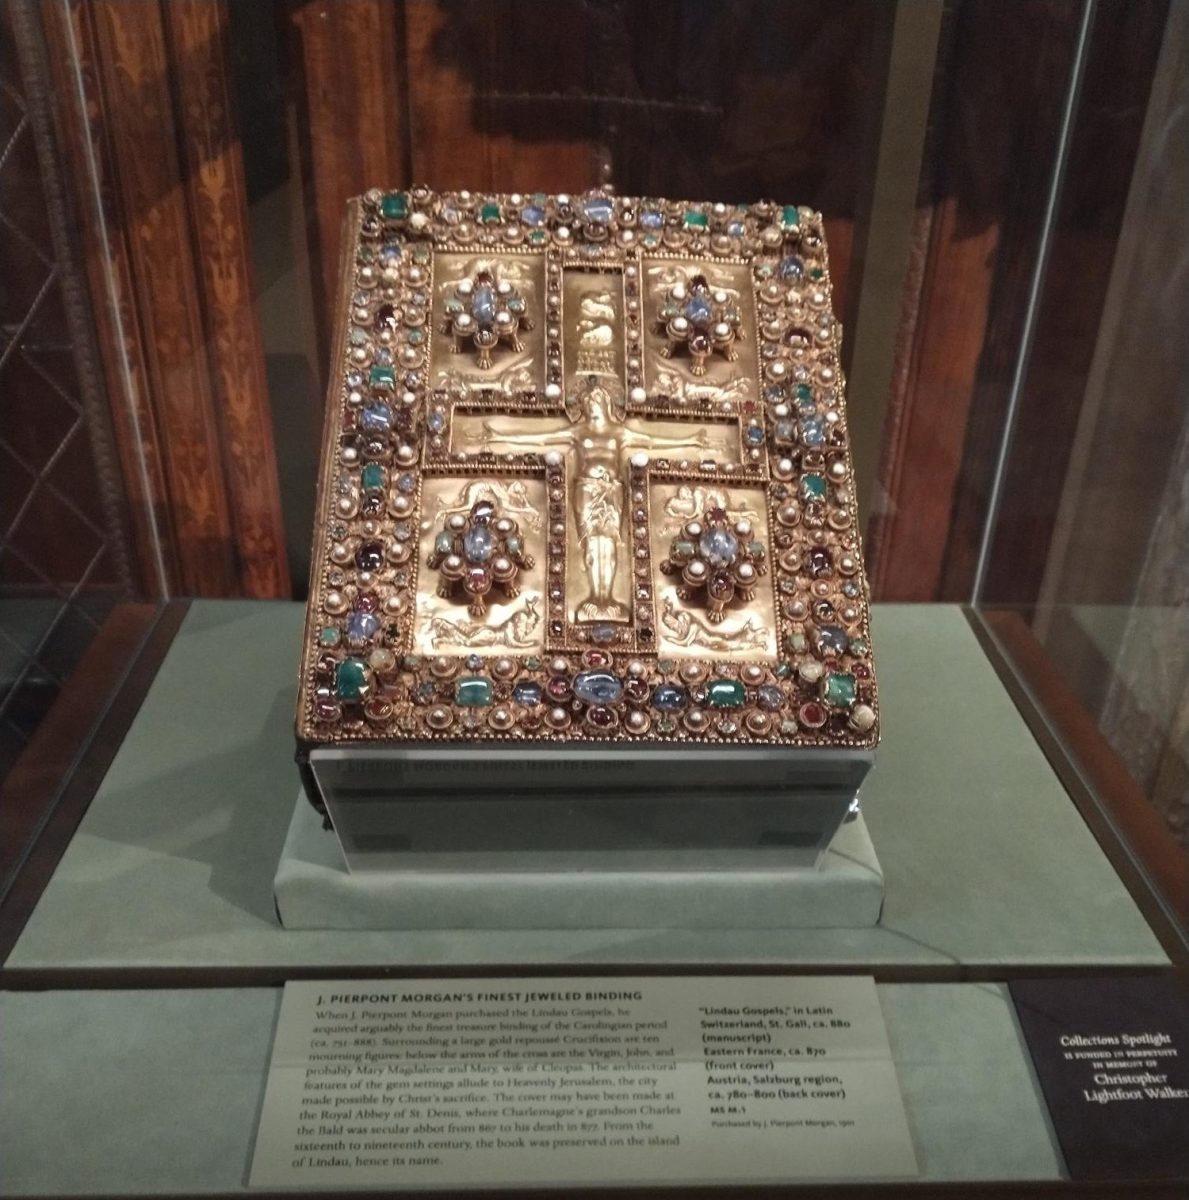 The Morgan Library & Museum has one of the oldest Bibles in the world. 